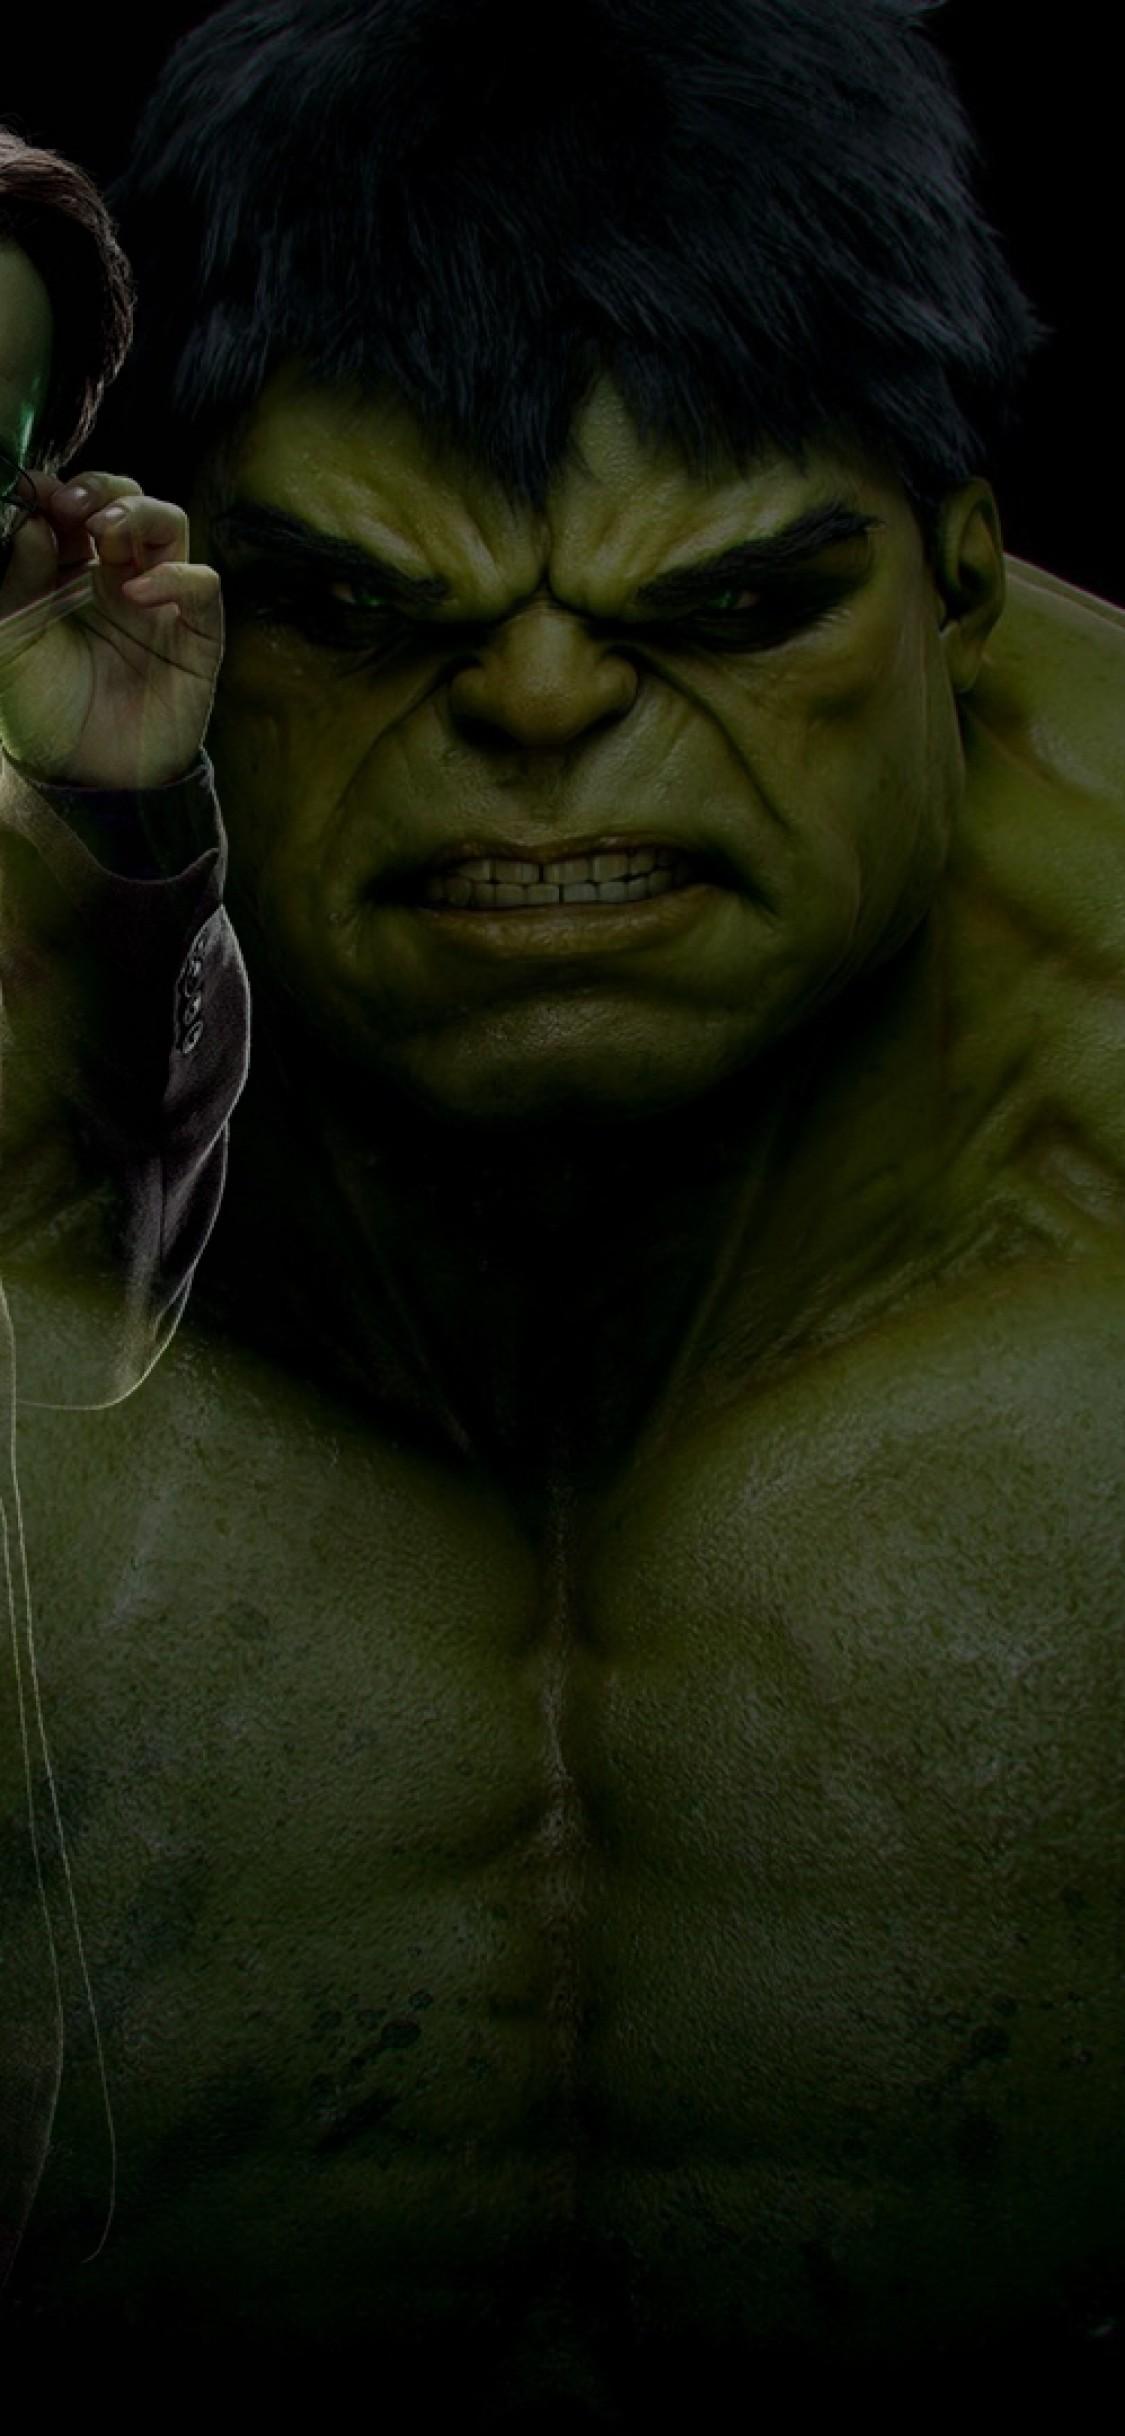 Download 1125x2436 The Avengers, Hulk Wallpaper for iPhone X